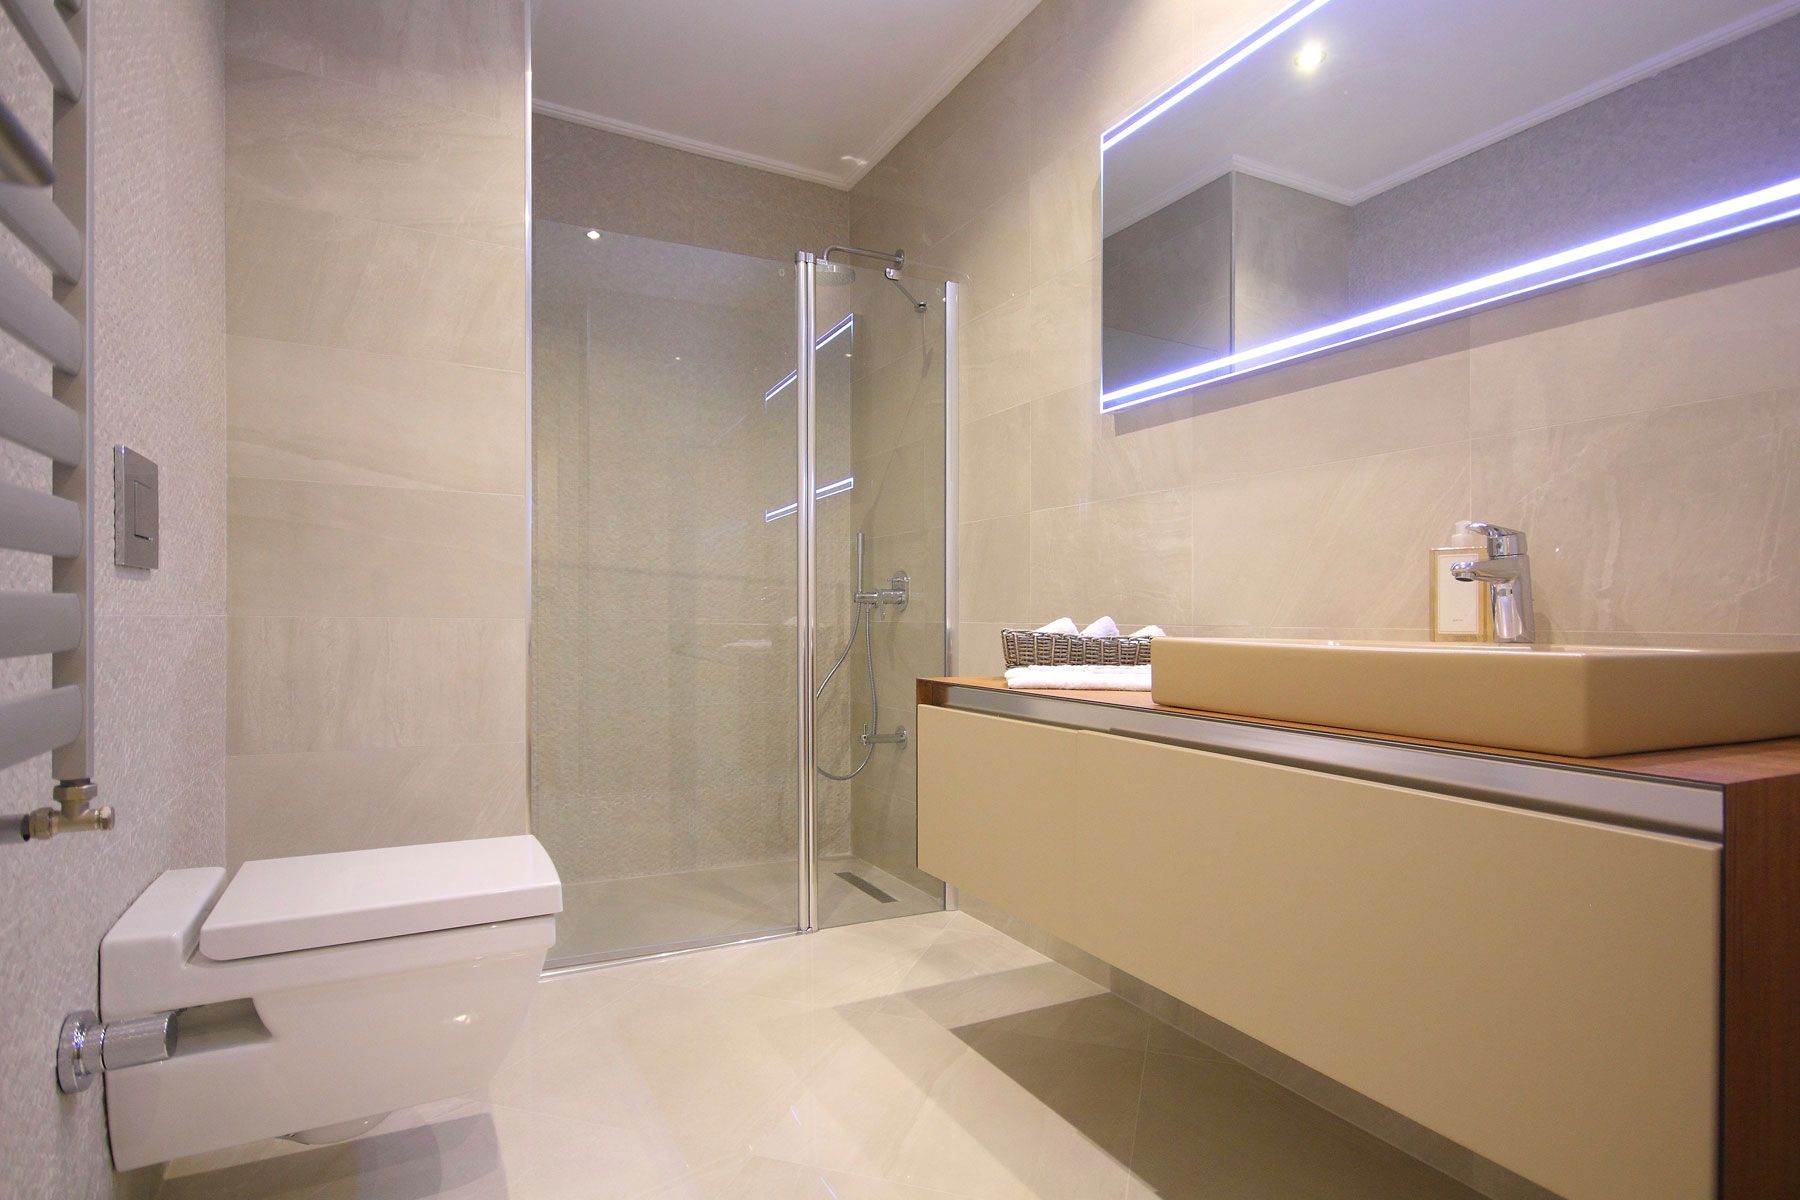 Infinity Wet Rooms provide the highest quality fixtures and fittings.